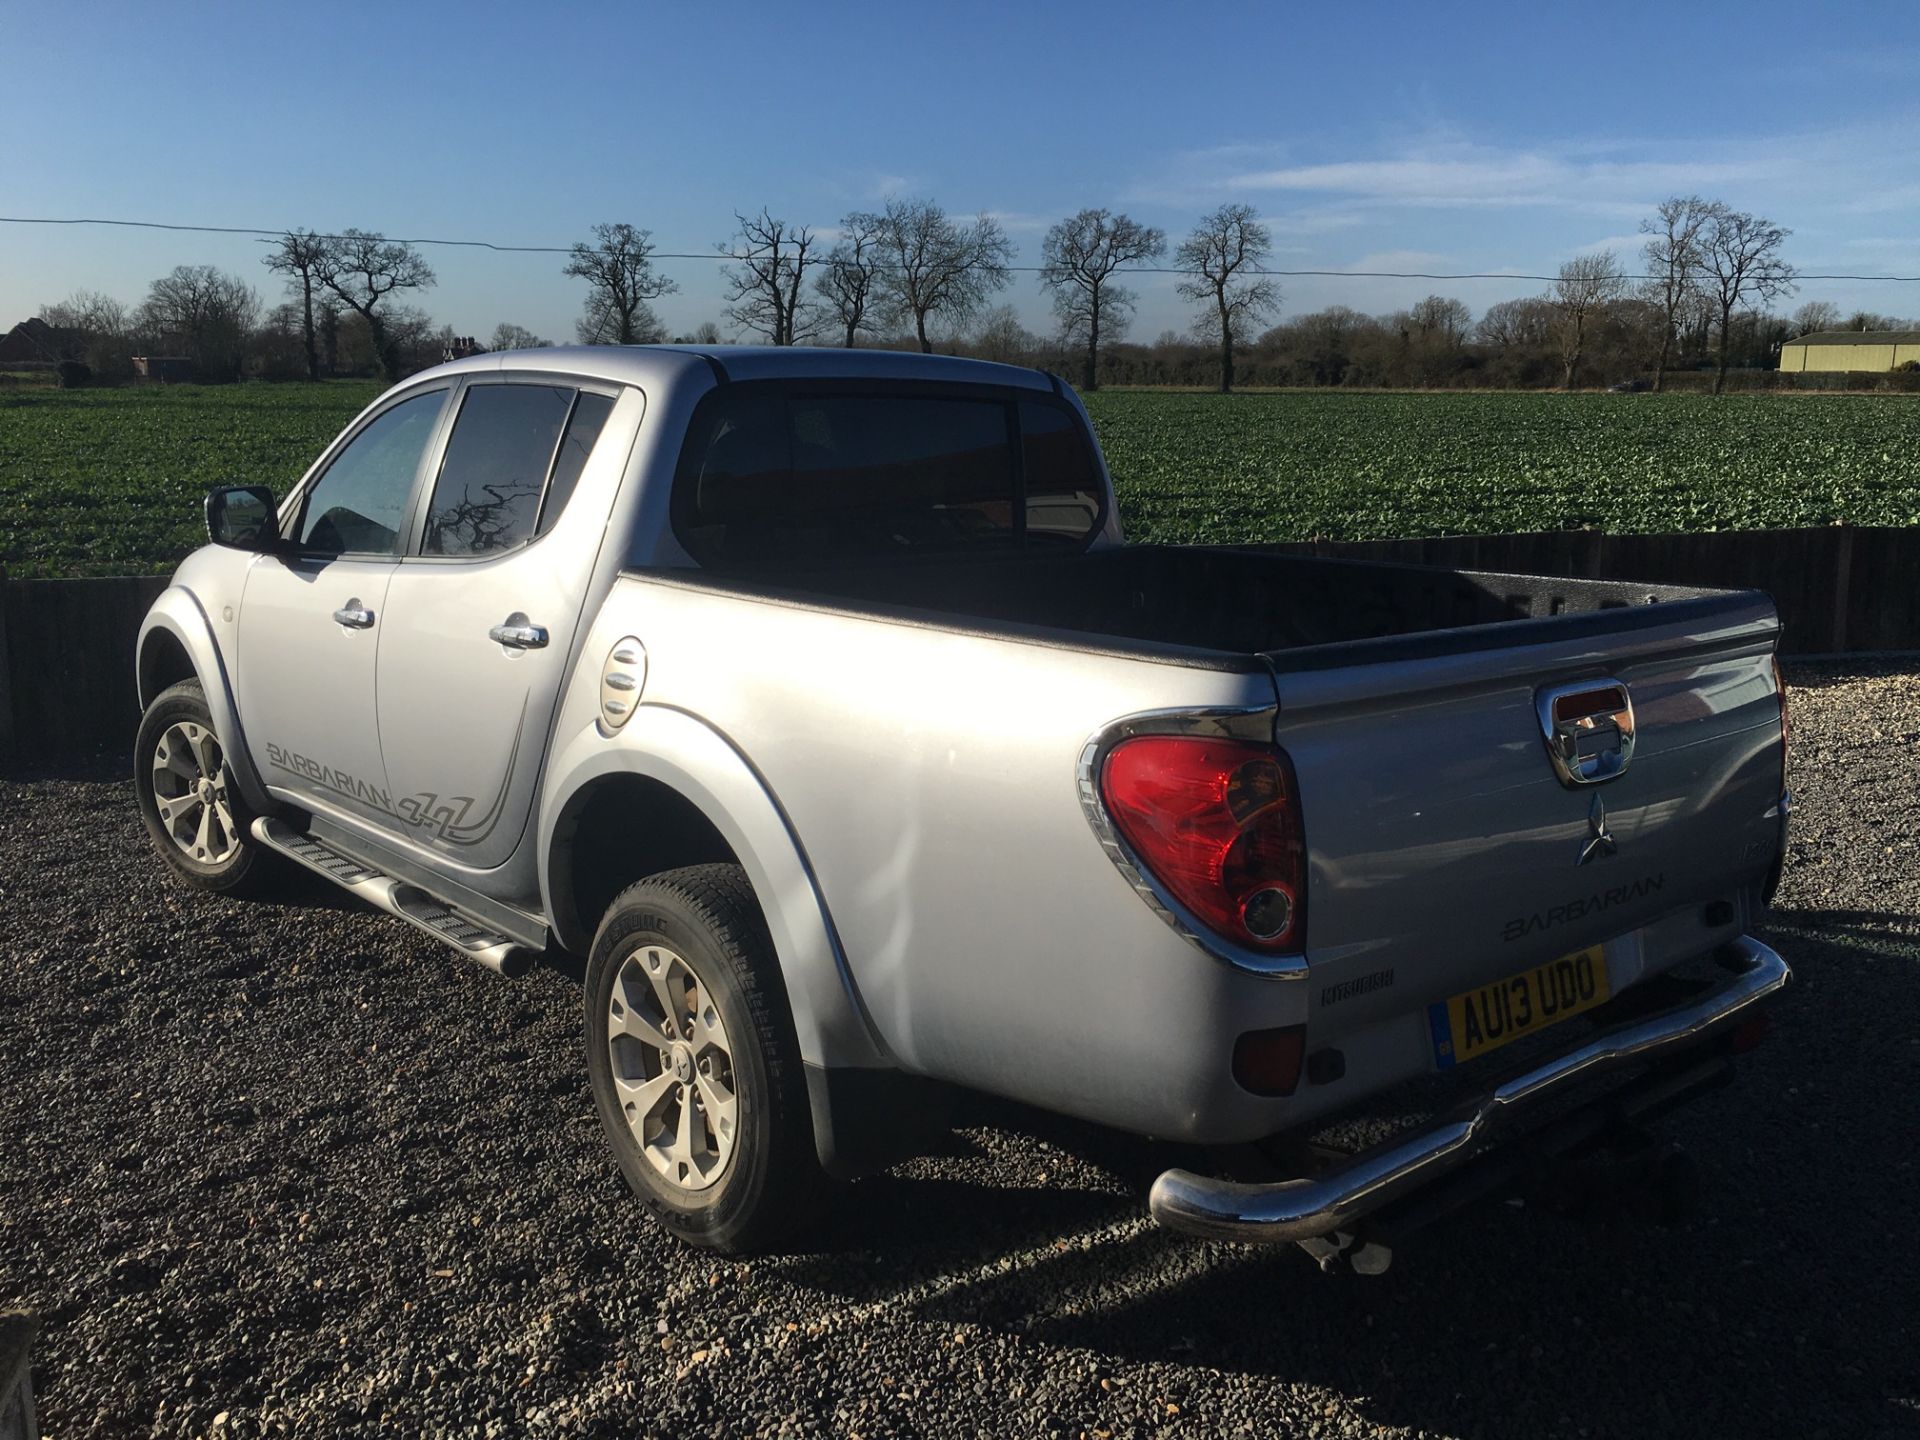 2013 13 reg MITSUBISHI BARBARIAN 4X4 DOUBLE CAB PICK UP TRUCK 1 OWNER FROM NEW, LOW MILEAGE 24k - Image 10 of 22